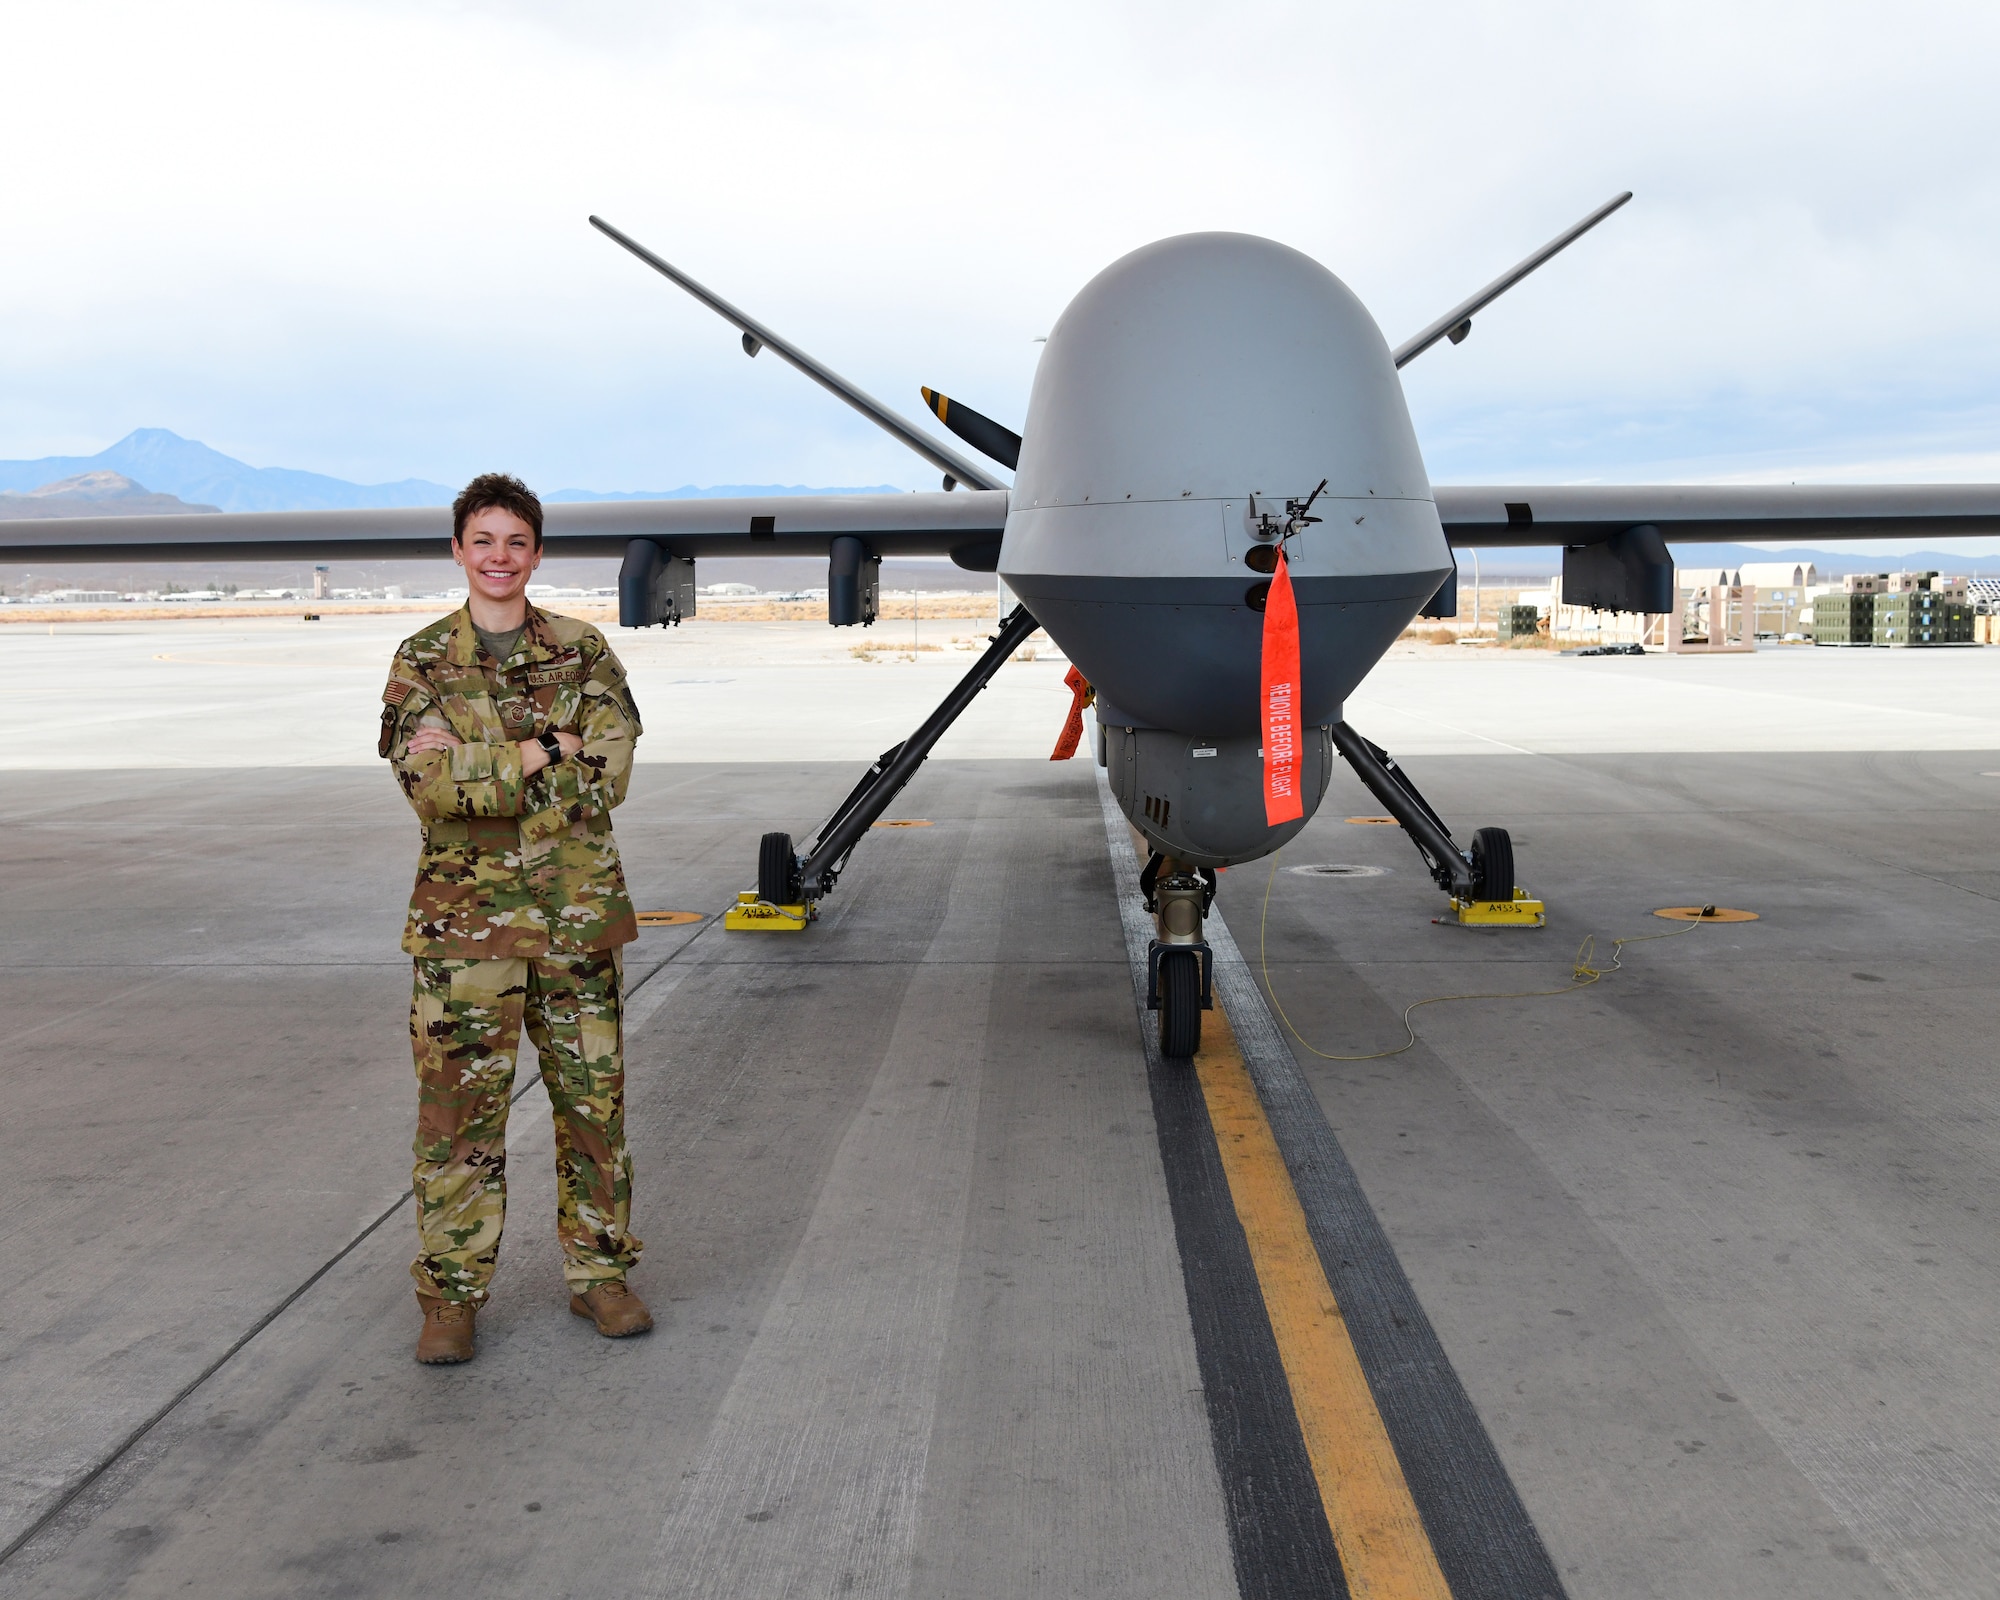 Master Sgt. Brittany, 91st Attack Squadron first sergeant, stands in front of MQ-9 Reaper, Jan. 22, Creech Air Force Base, Nevada. Brittany is one of the first enlisted aviators who have taken the step outside her career field to become a first sergeant, while still maintaining her flight hours and required qualifications.